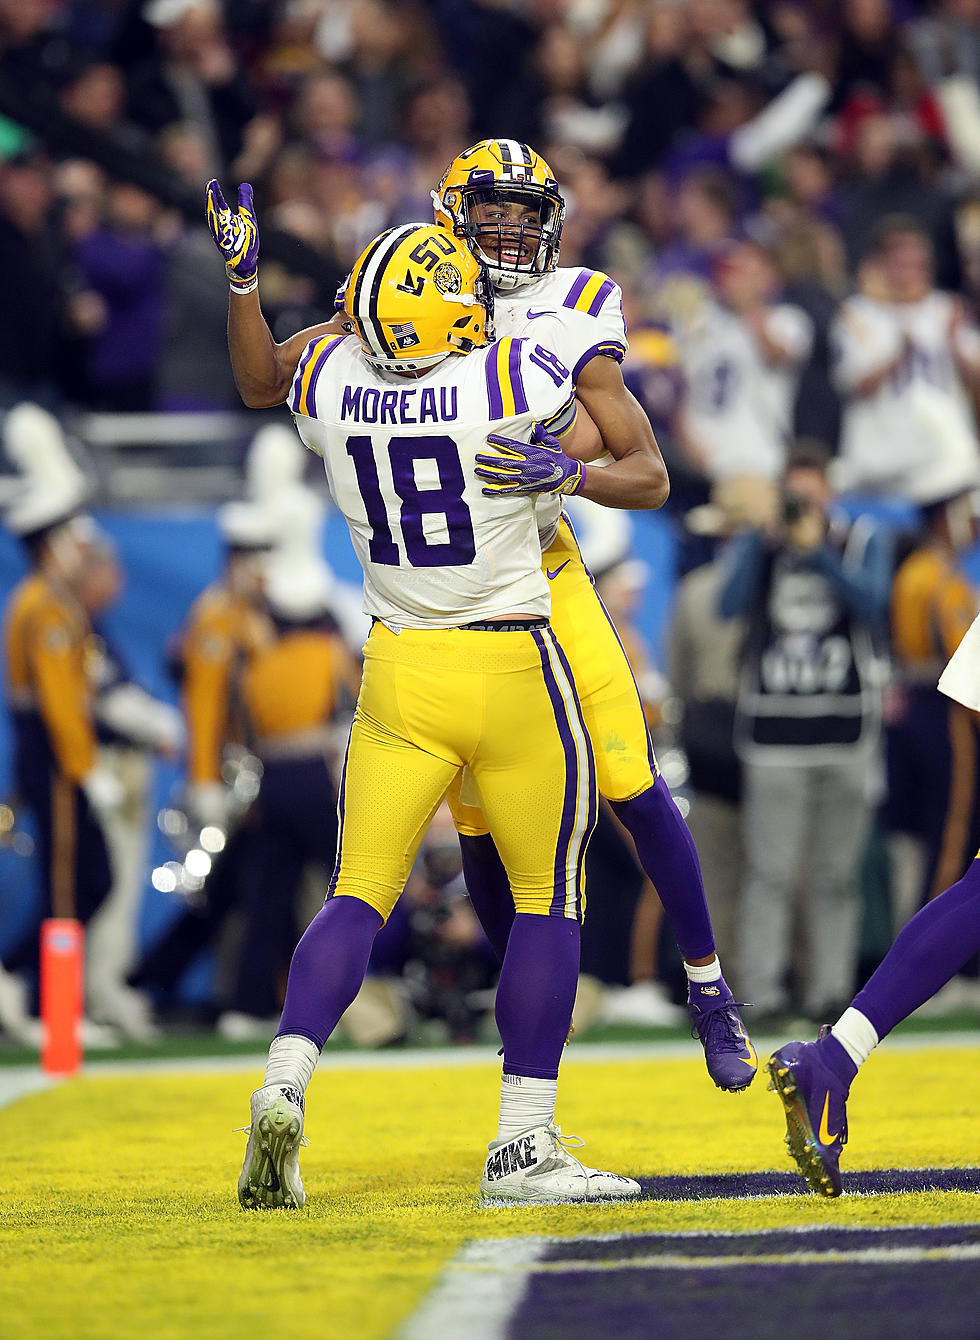 New Orleans Saints Sign Former LSU Tigers TE Foster Morneau